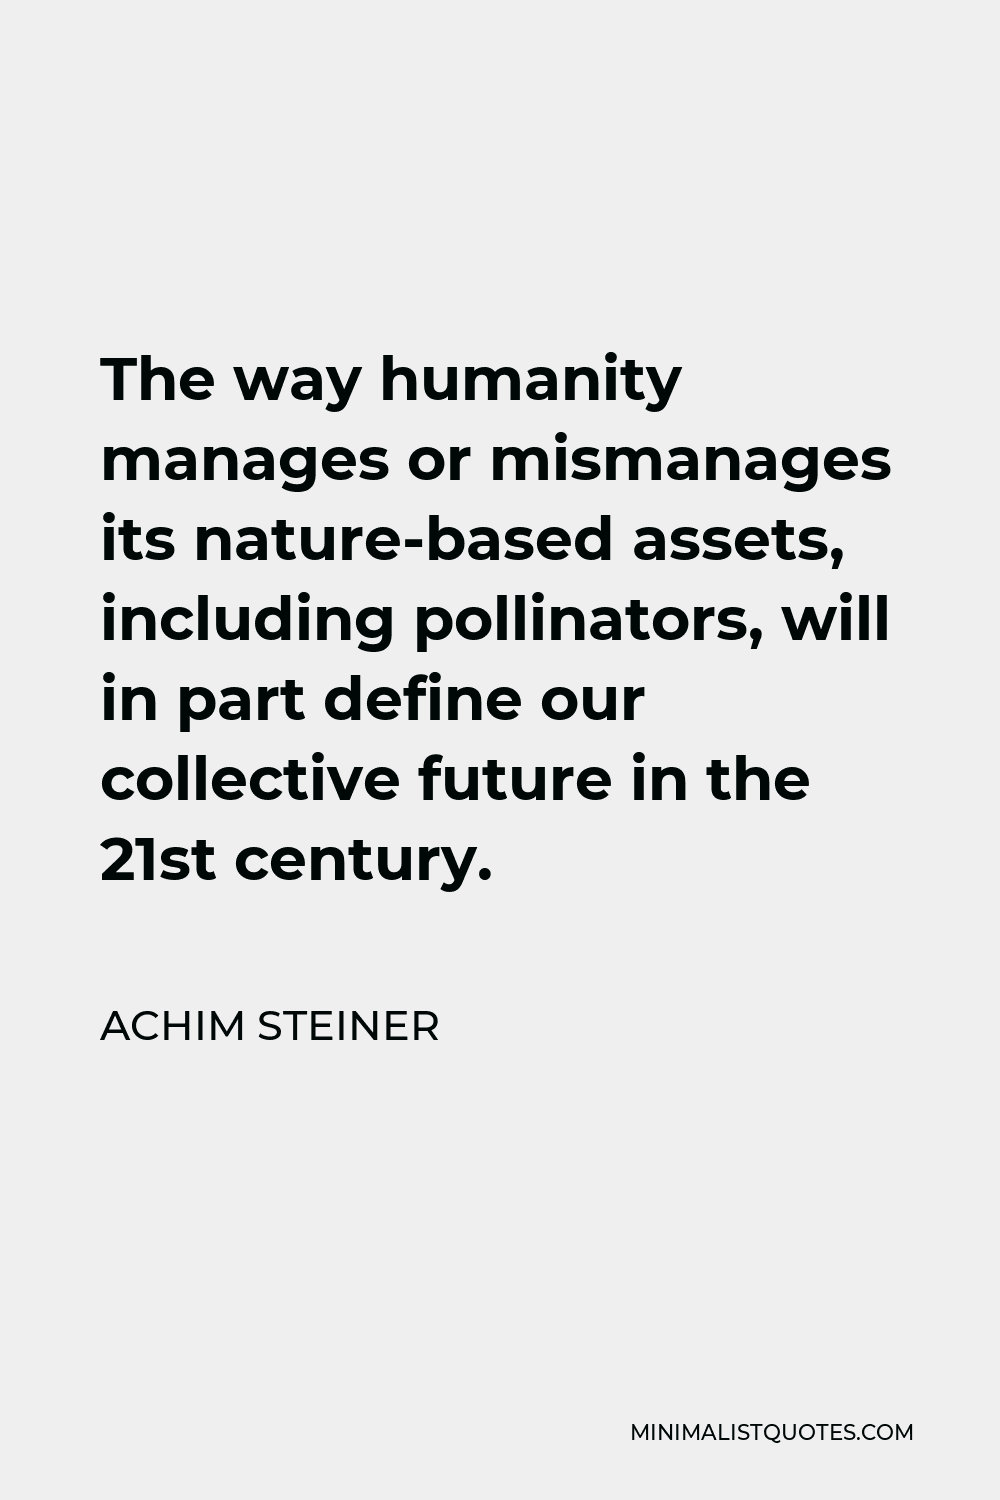 Achim Steiner Quote - The way humanity manages or mismanages its nature-based assets, including pollinators, will in part define our collective future in the 21st century.